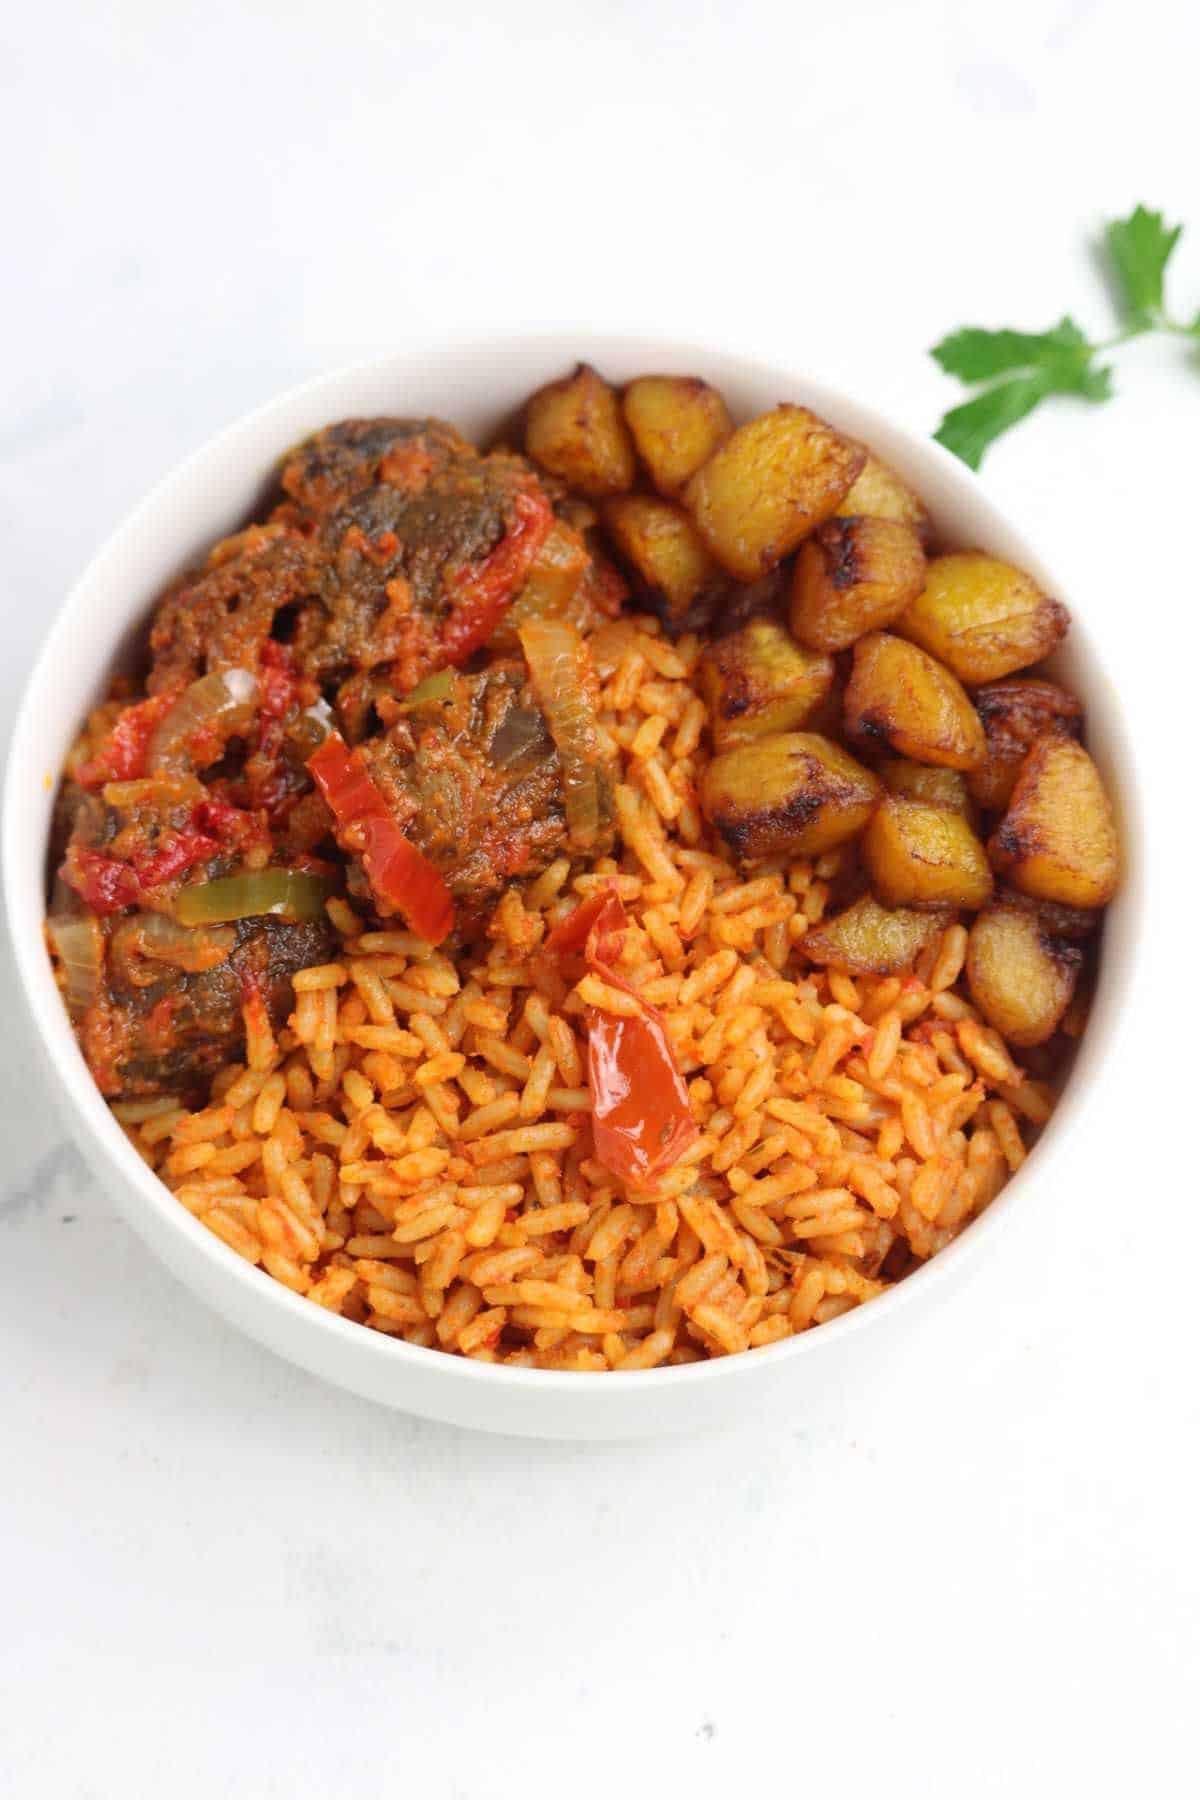 served with fried plantain and beef.